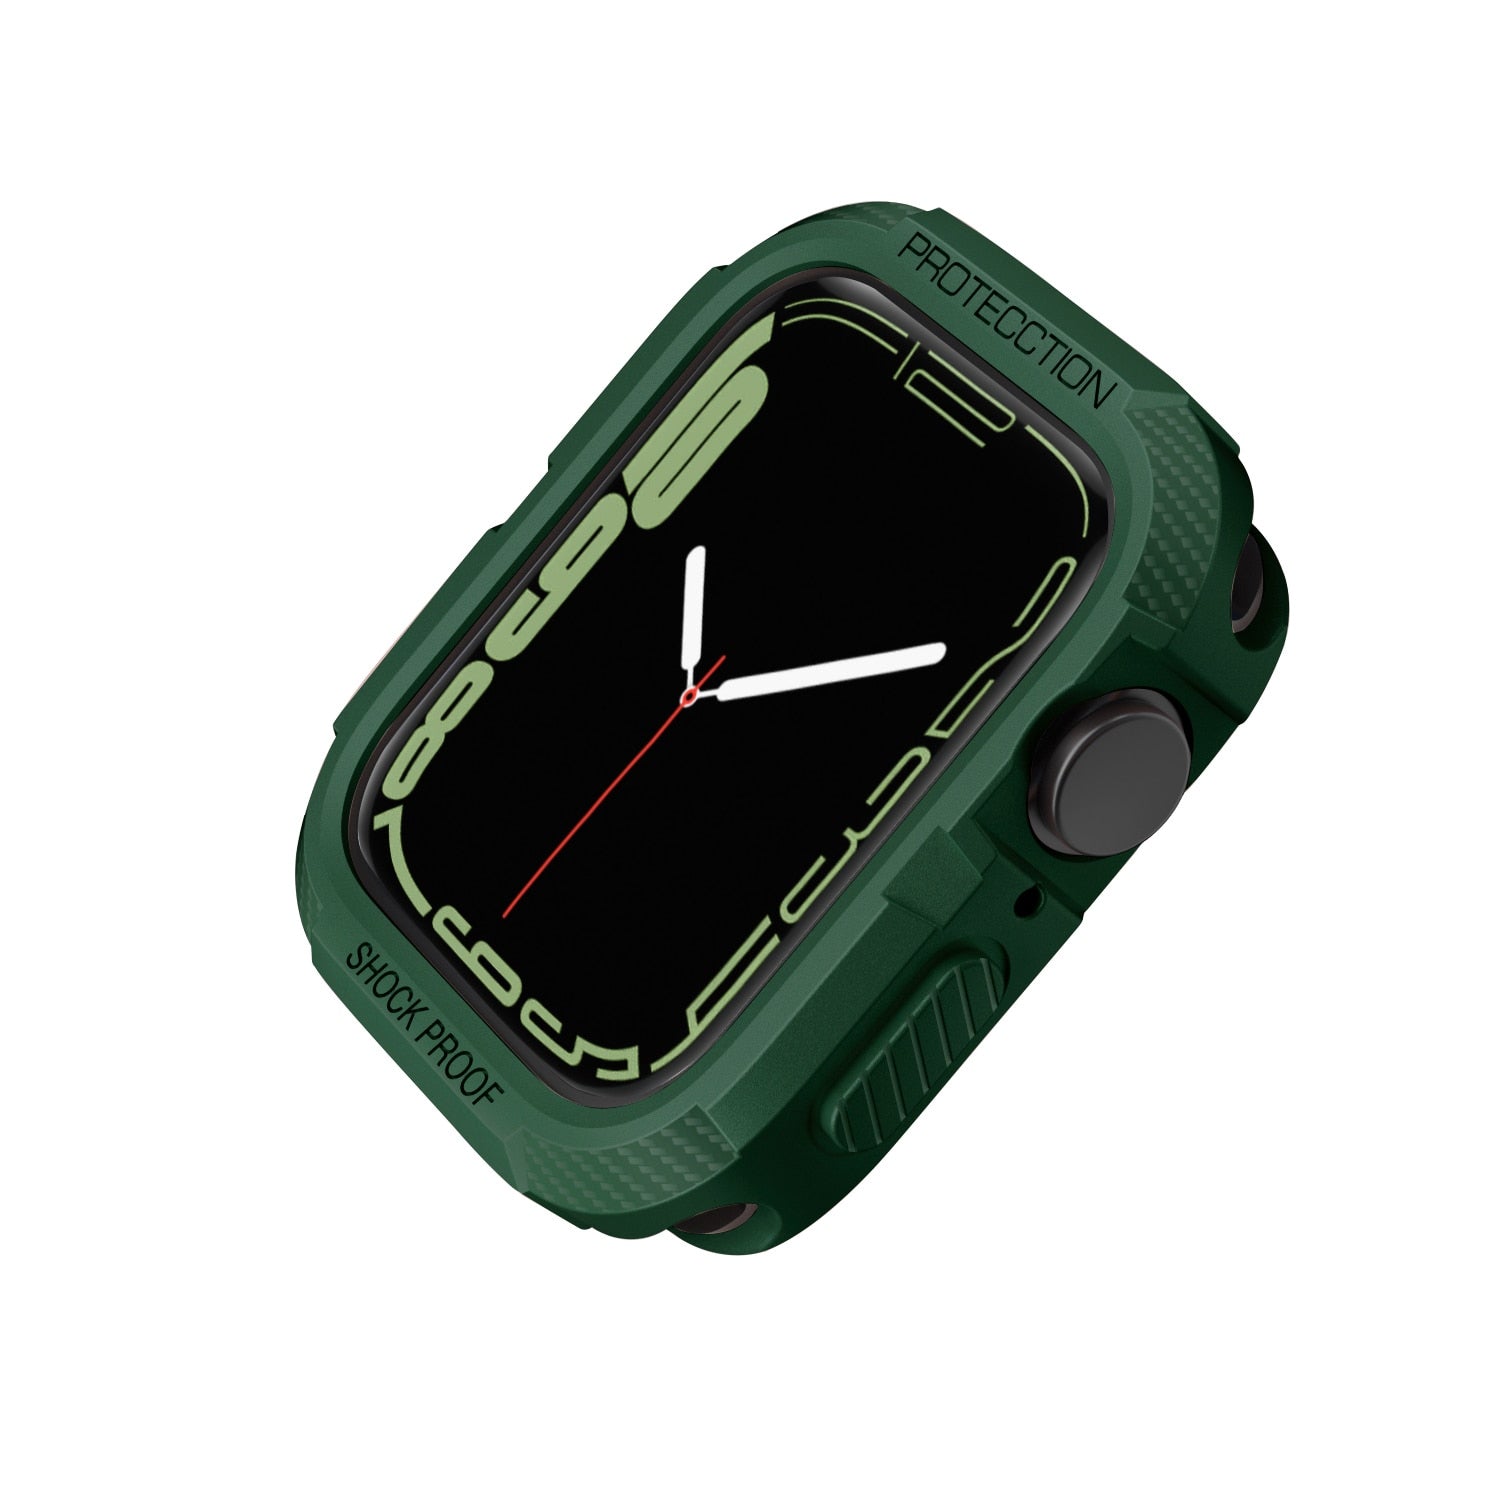 Shockproof Protector Bumper Case for Apple Watch